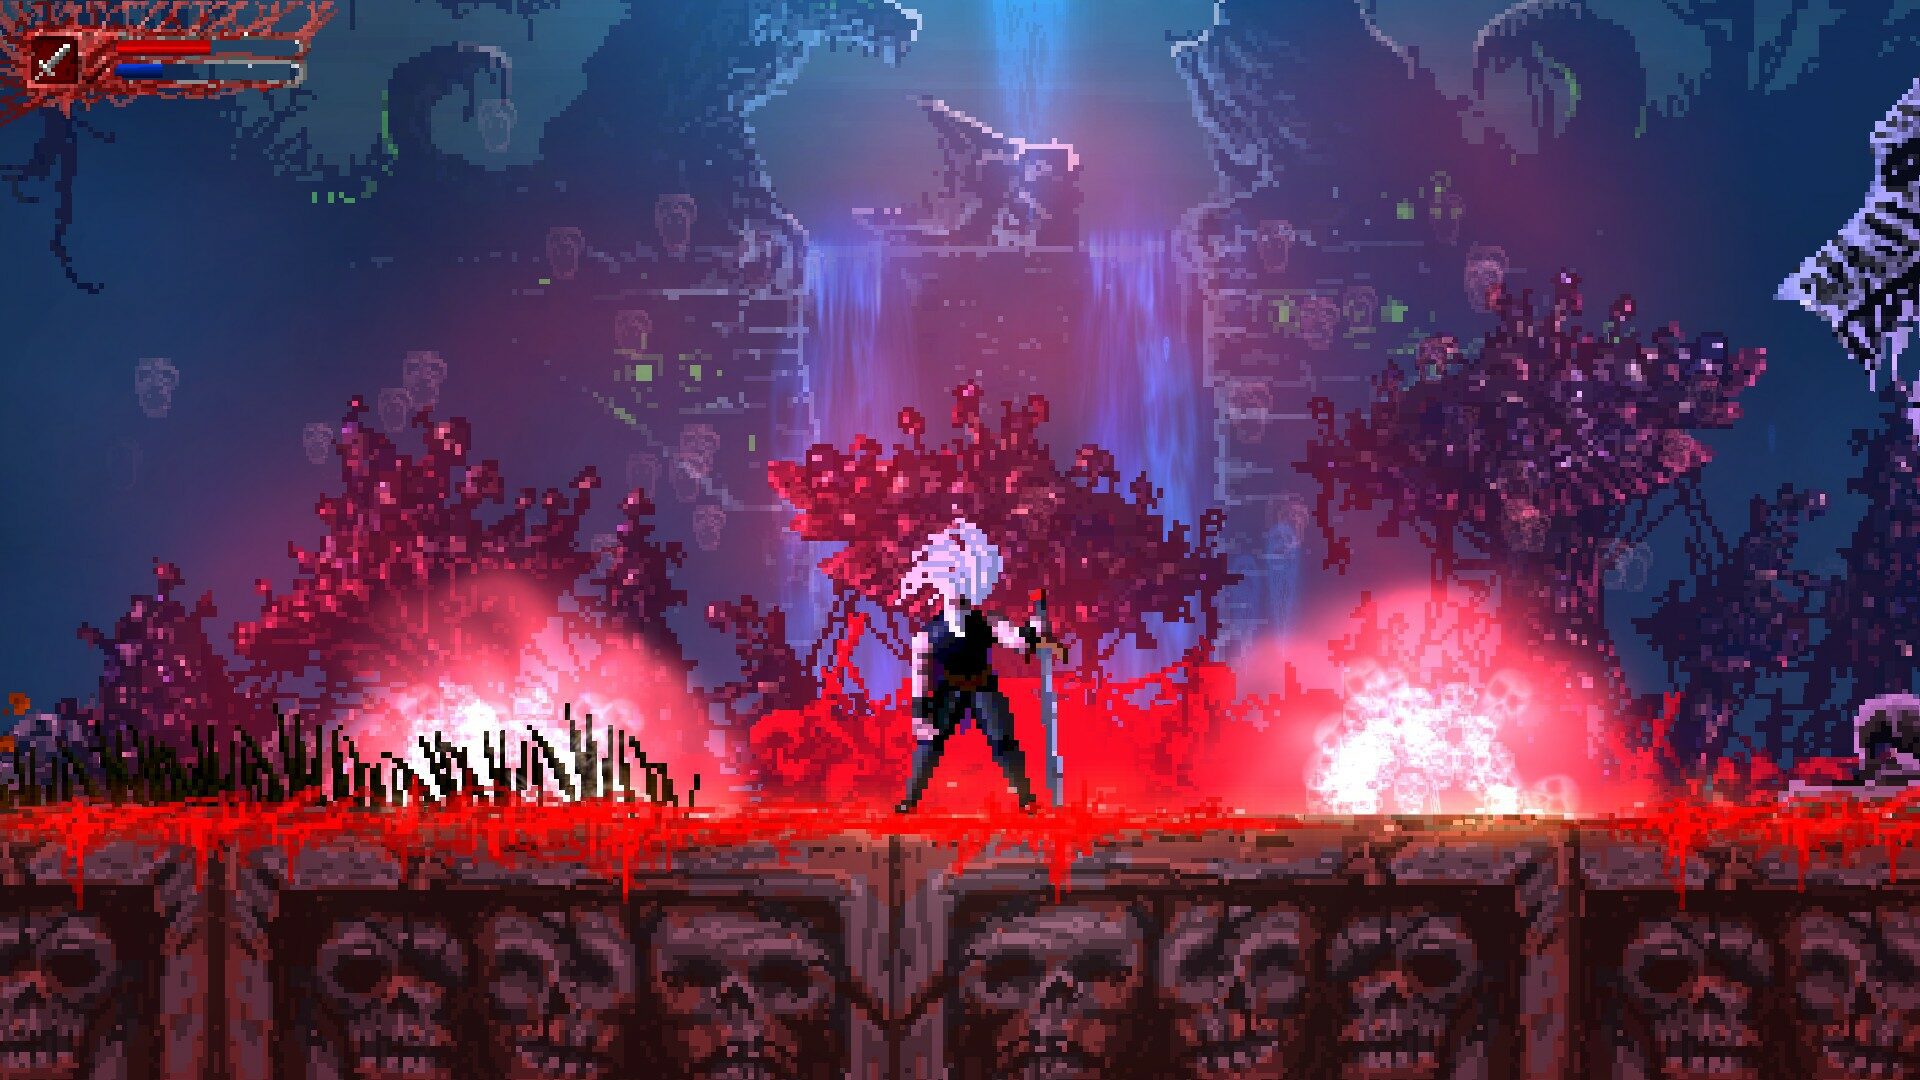 Slain: Back from Hell Delayed on Xbox One